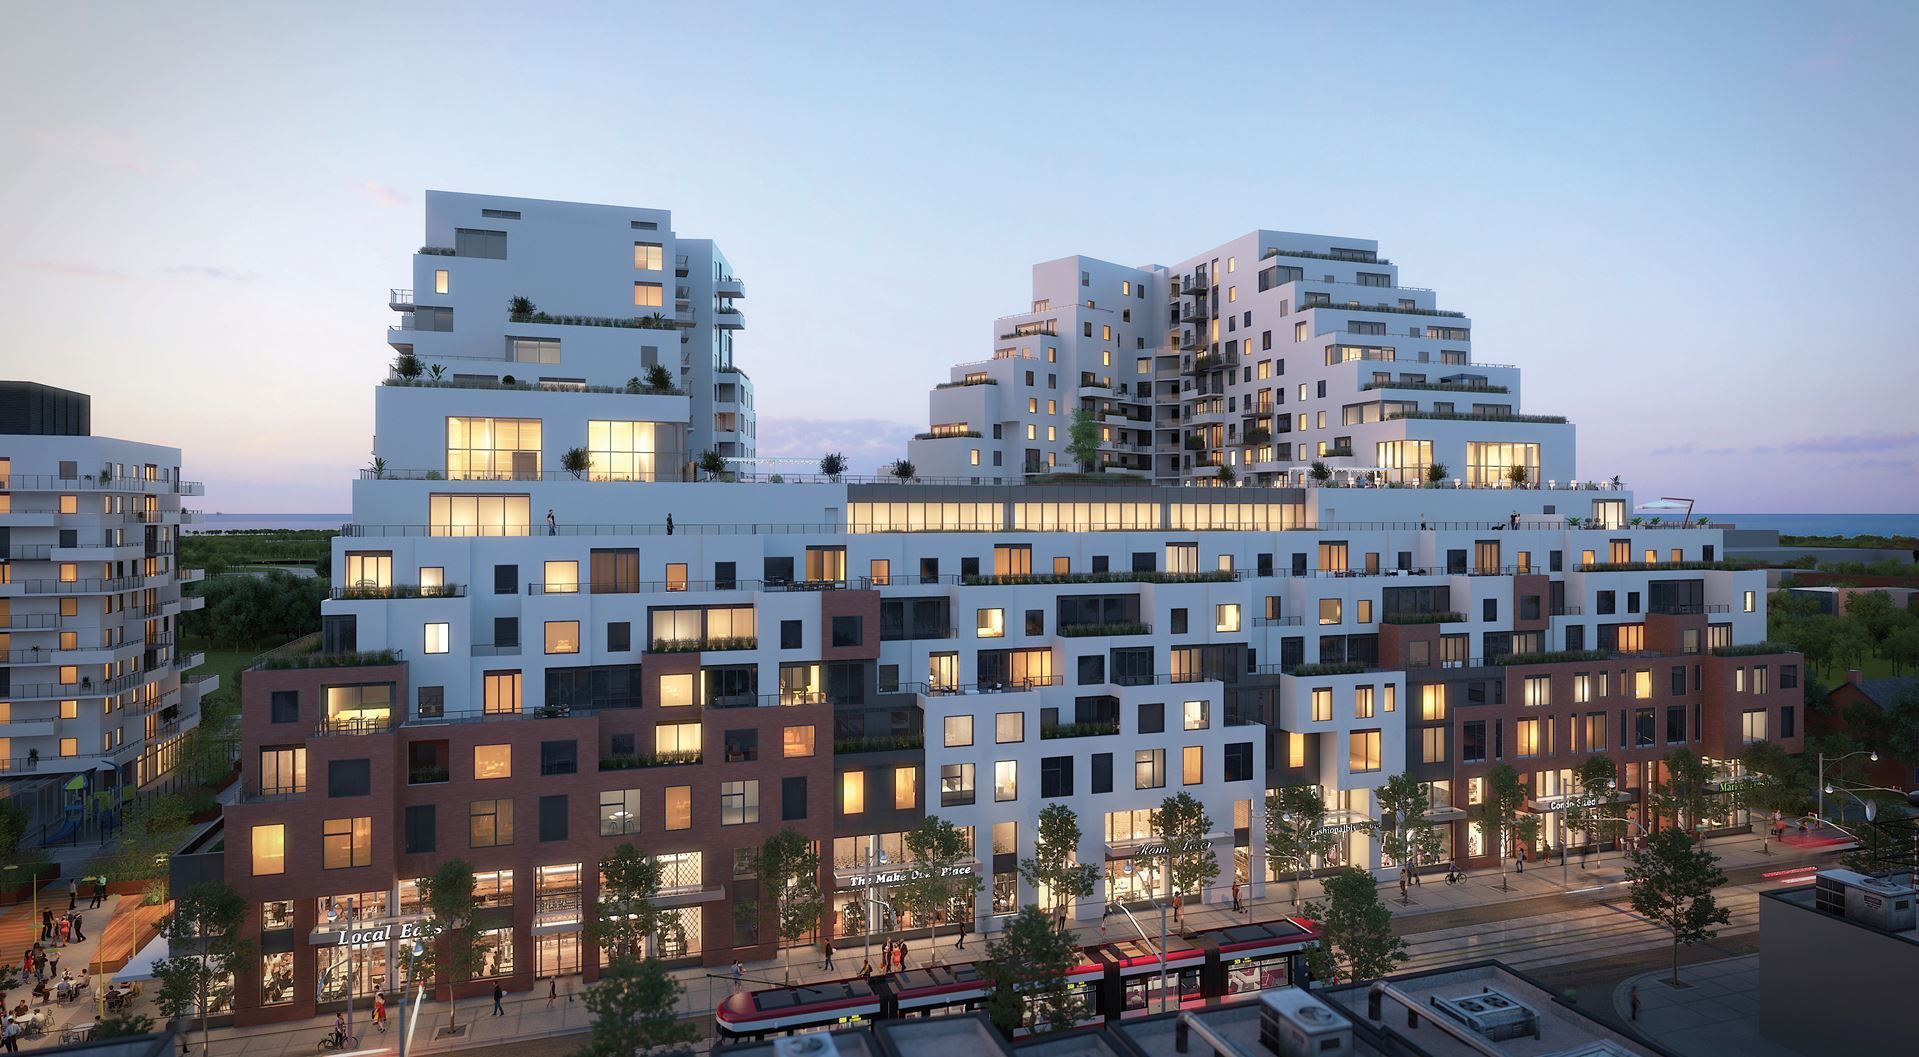 Latest Developments: Condo-Beach Living Coming To The East End